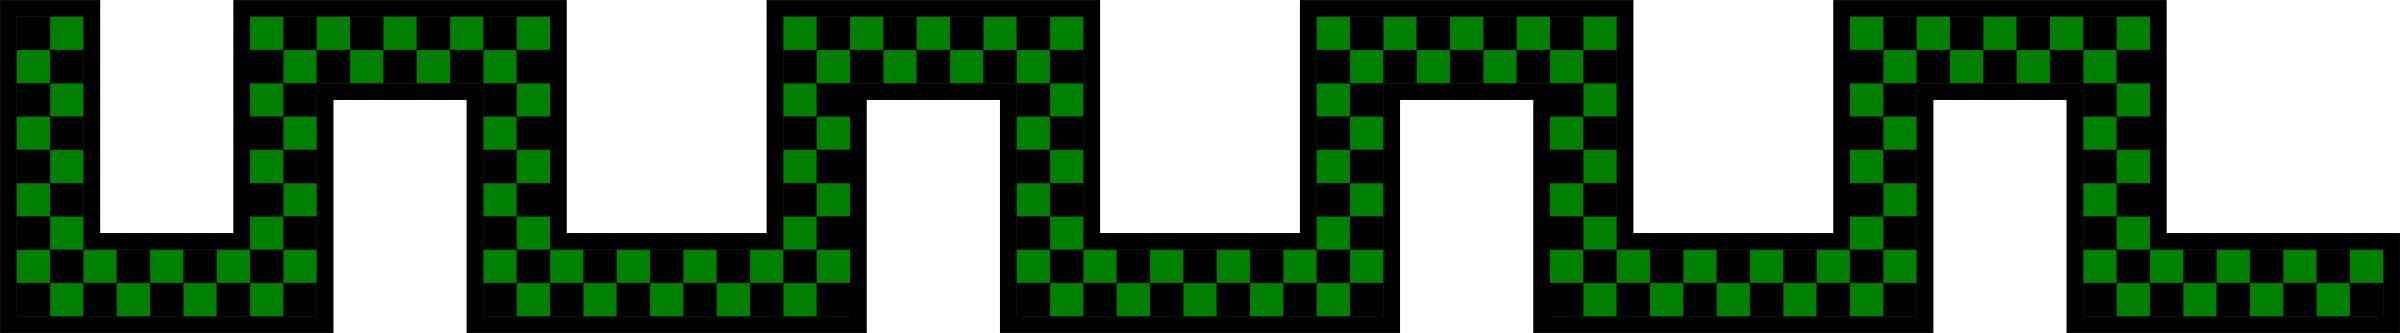 Divider - checked green snake shape png